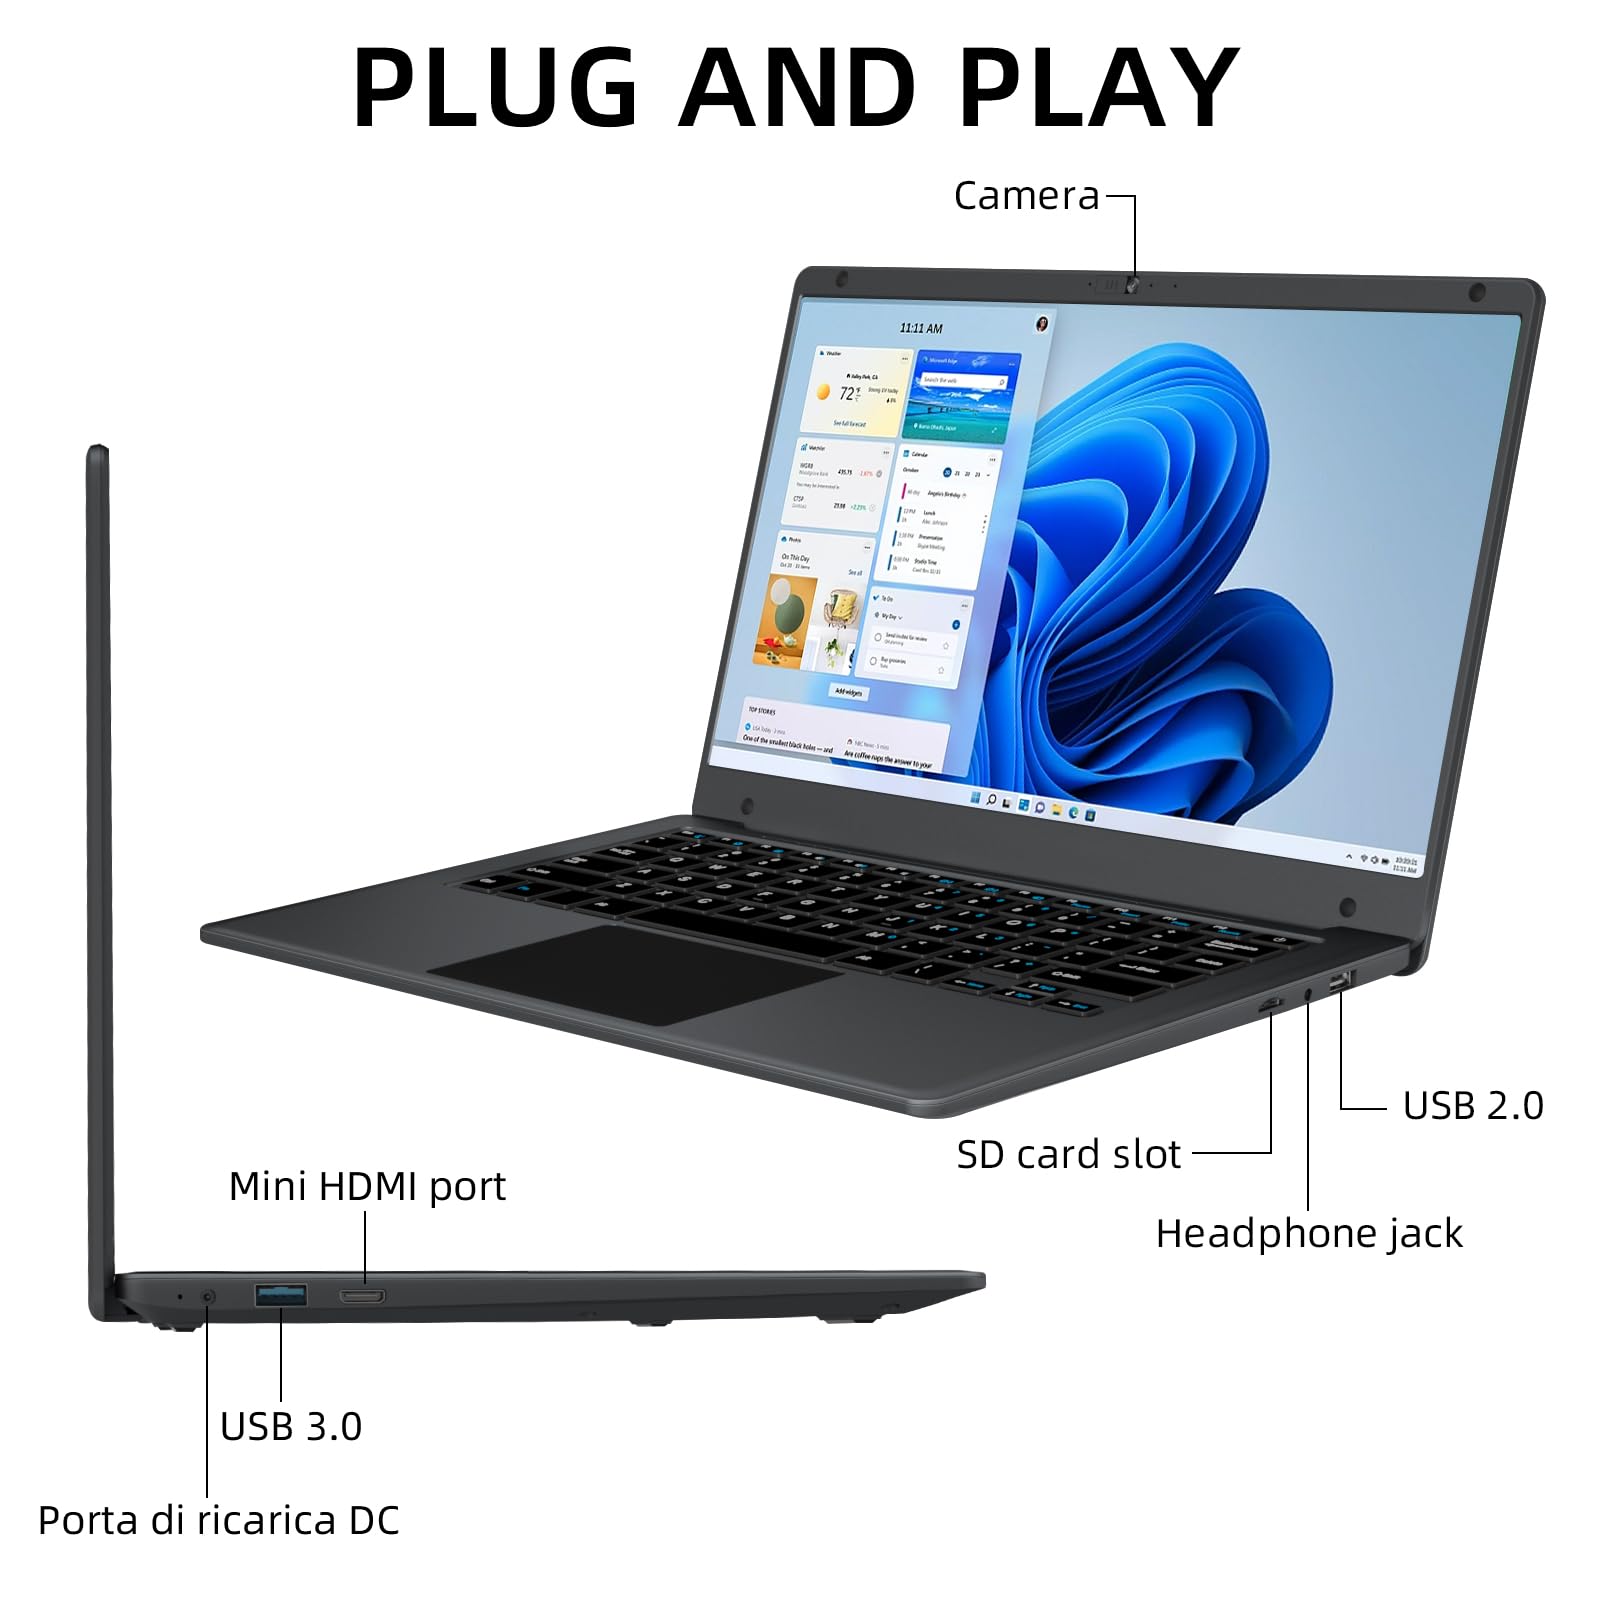 Morostron 13.5" Touch Screen Laptop, Win11 Laptop Computer with N5095, 16GB RAM 256GB SSD, 3000x2000 FHD, Backlit Keyboard, Touch ID, WiFi, USB3.0 * 2, Bluetooth 4.2, HDMI, 38WH Battery, Gray